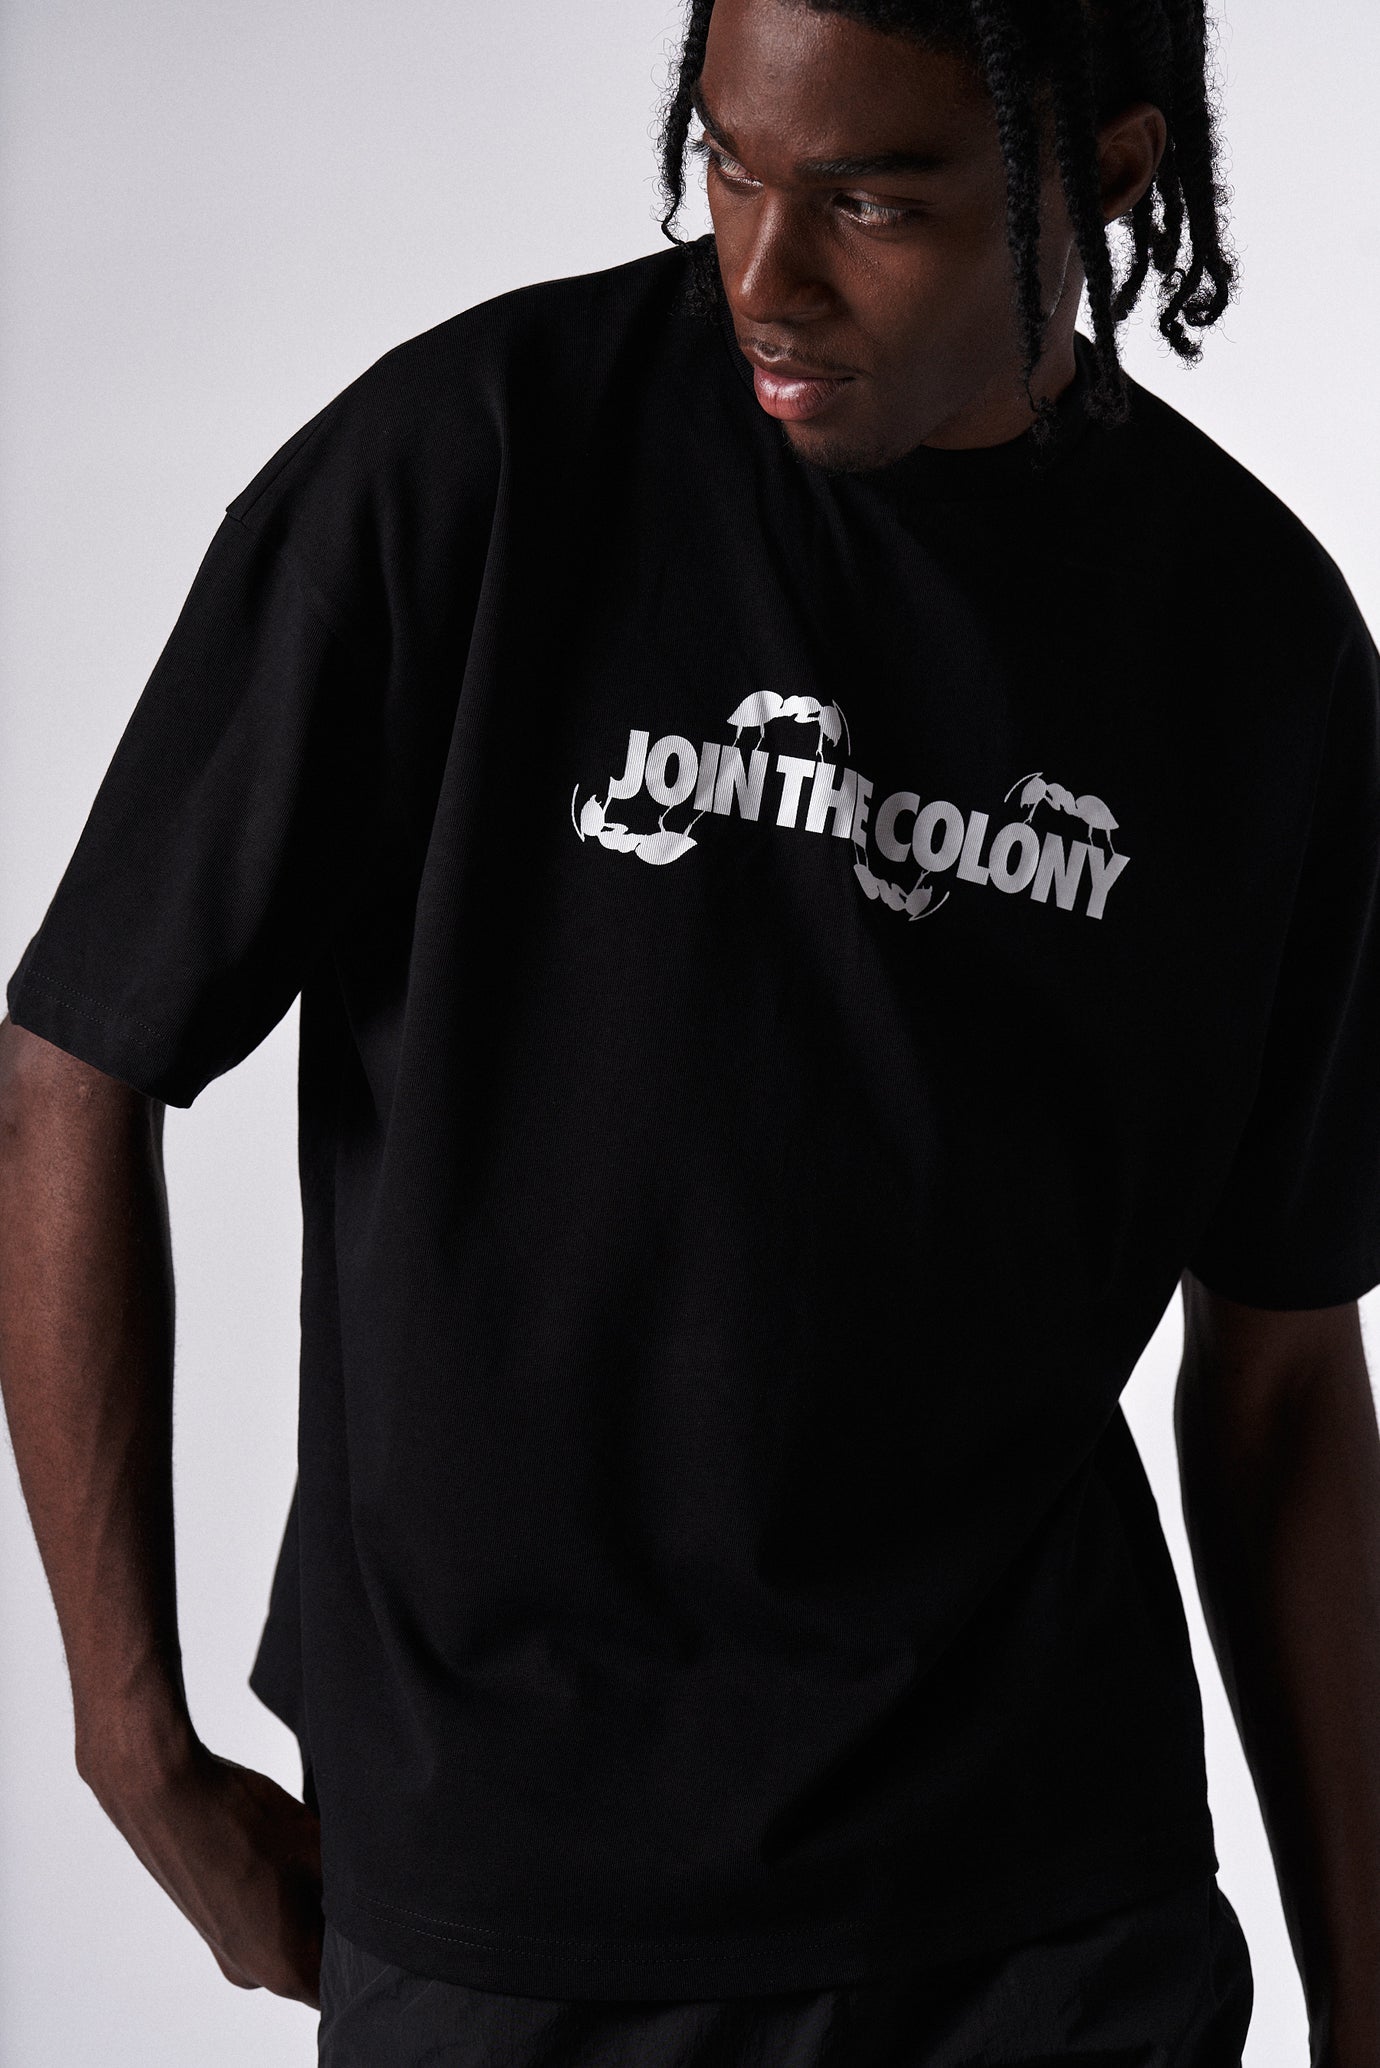 Join The Colony T-Shirt